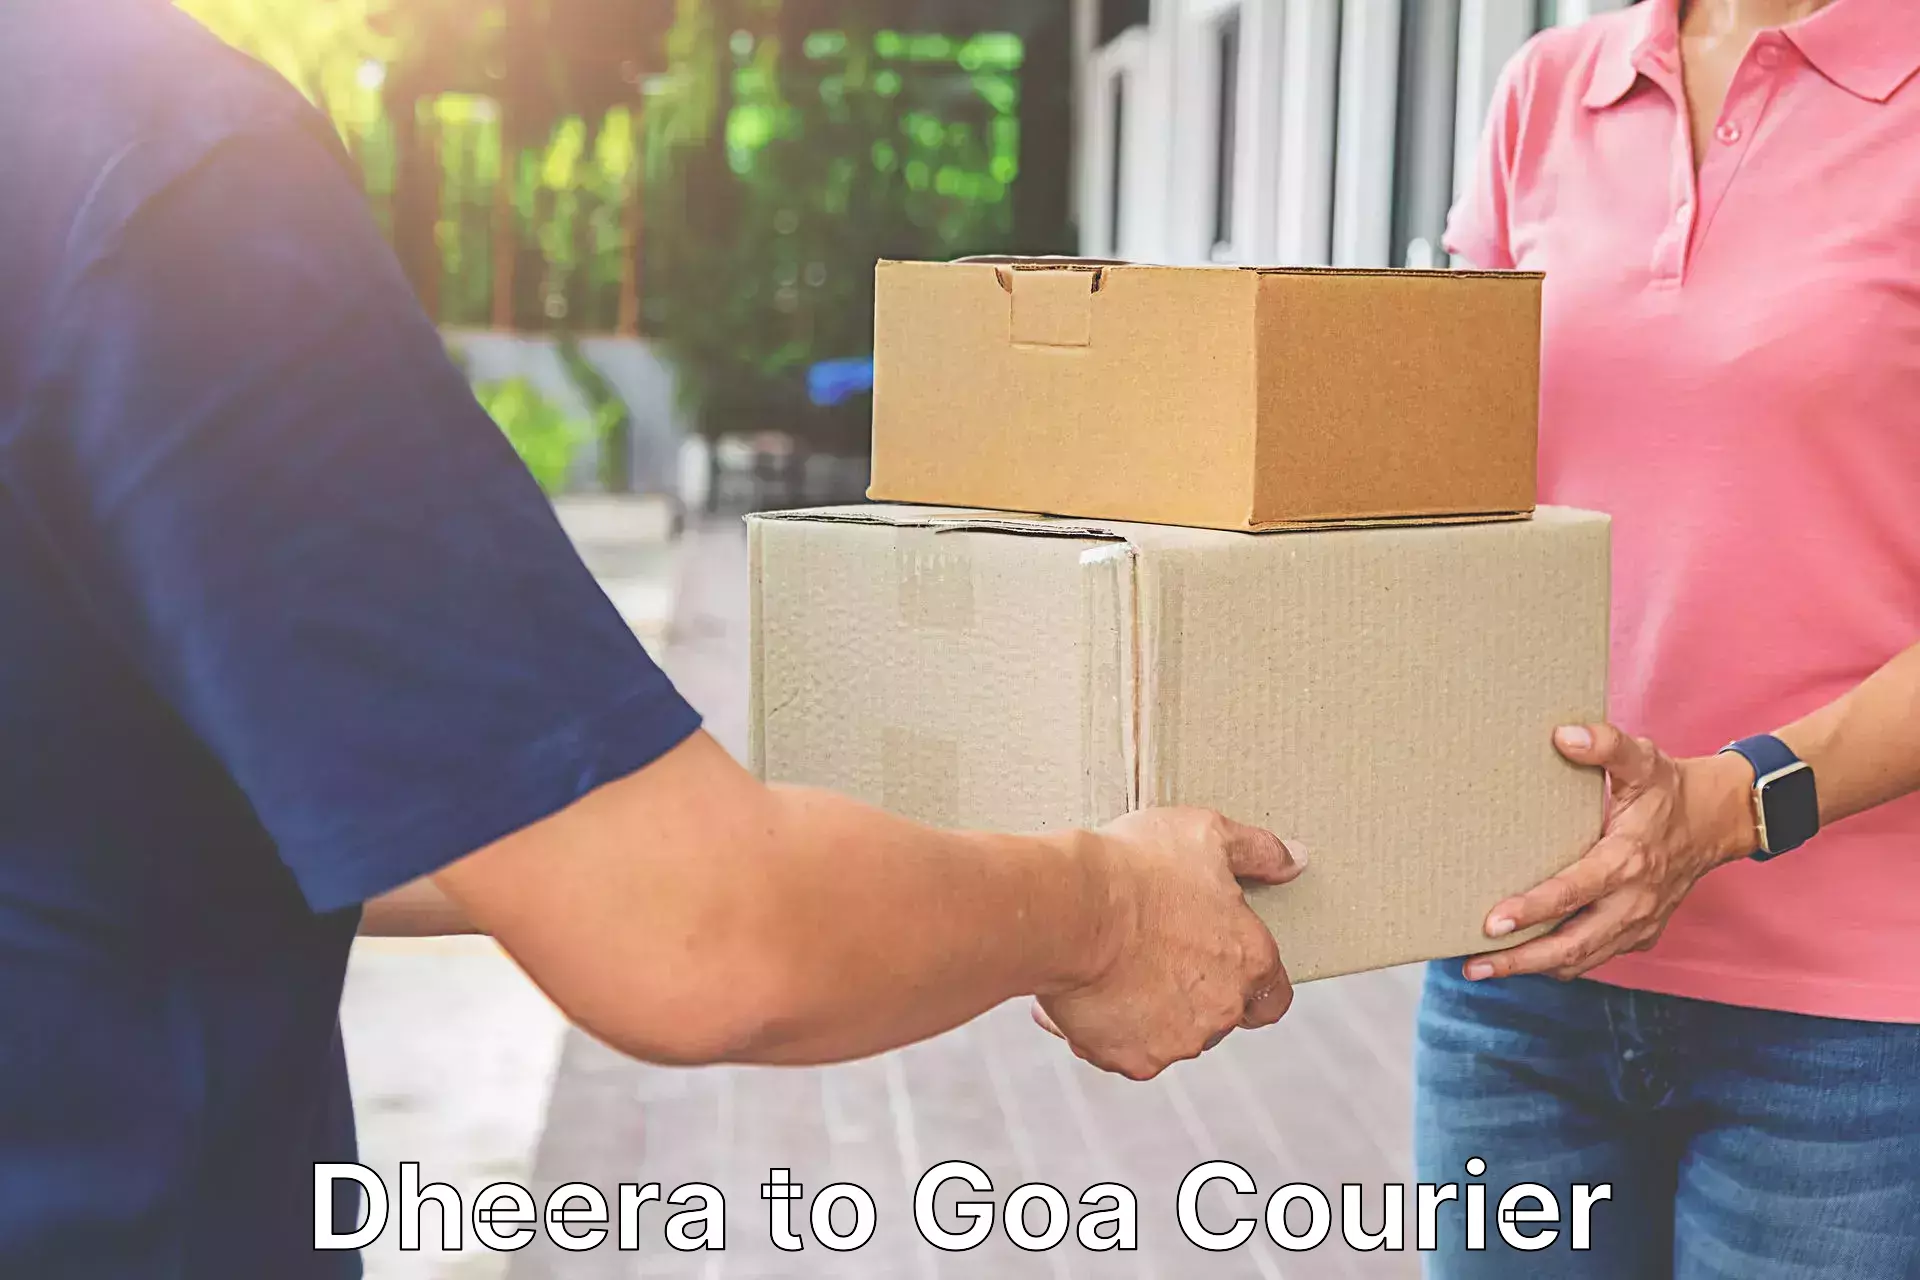 Courier rate comparison Dheera to Goa